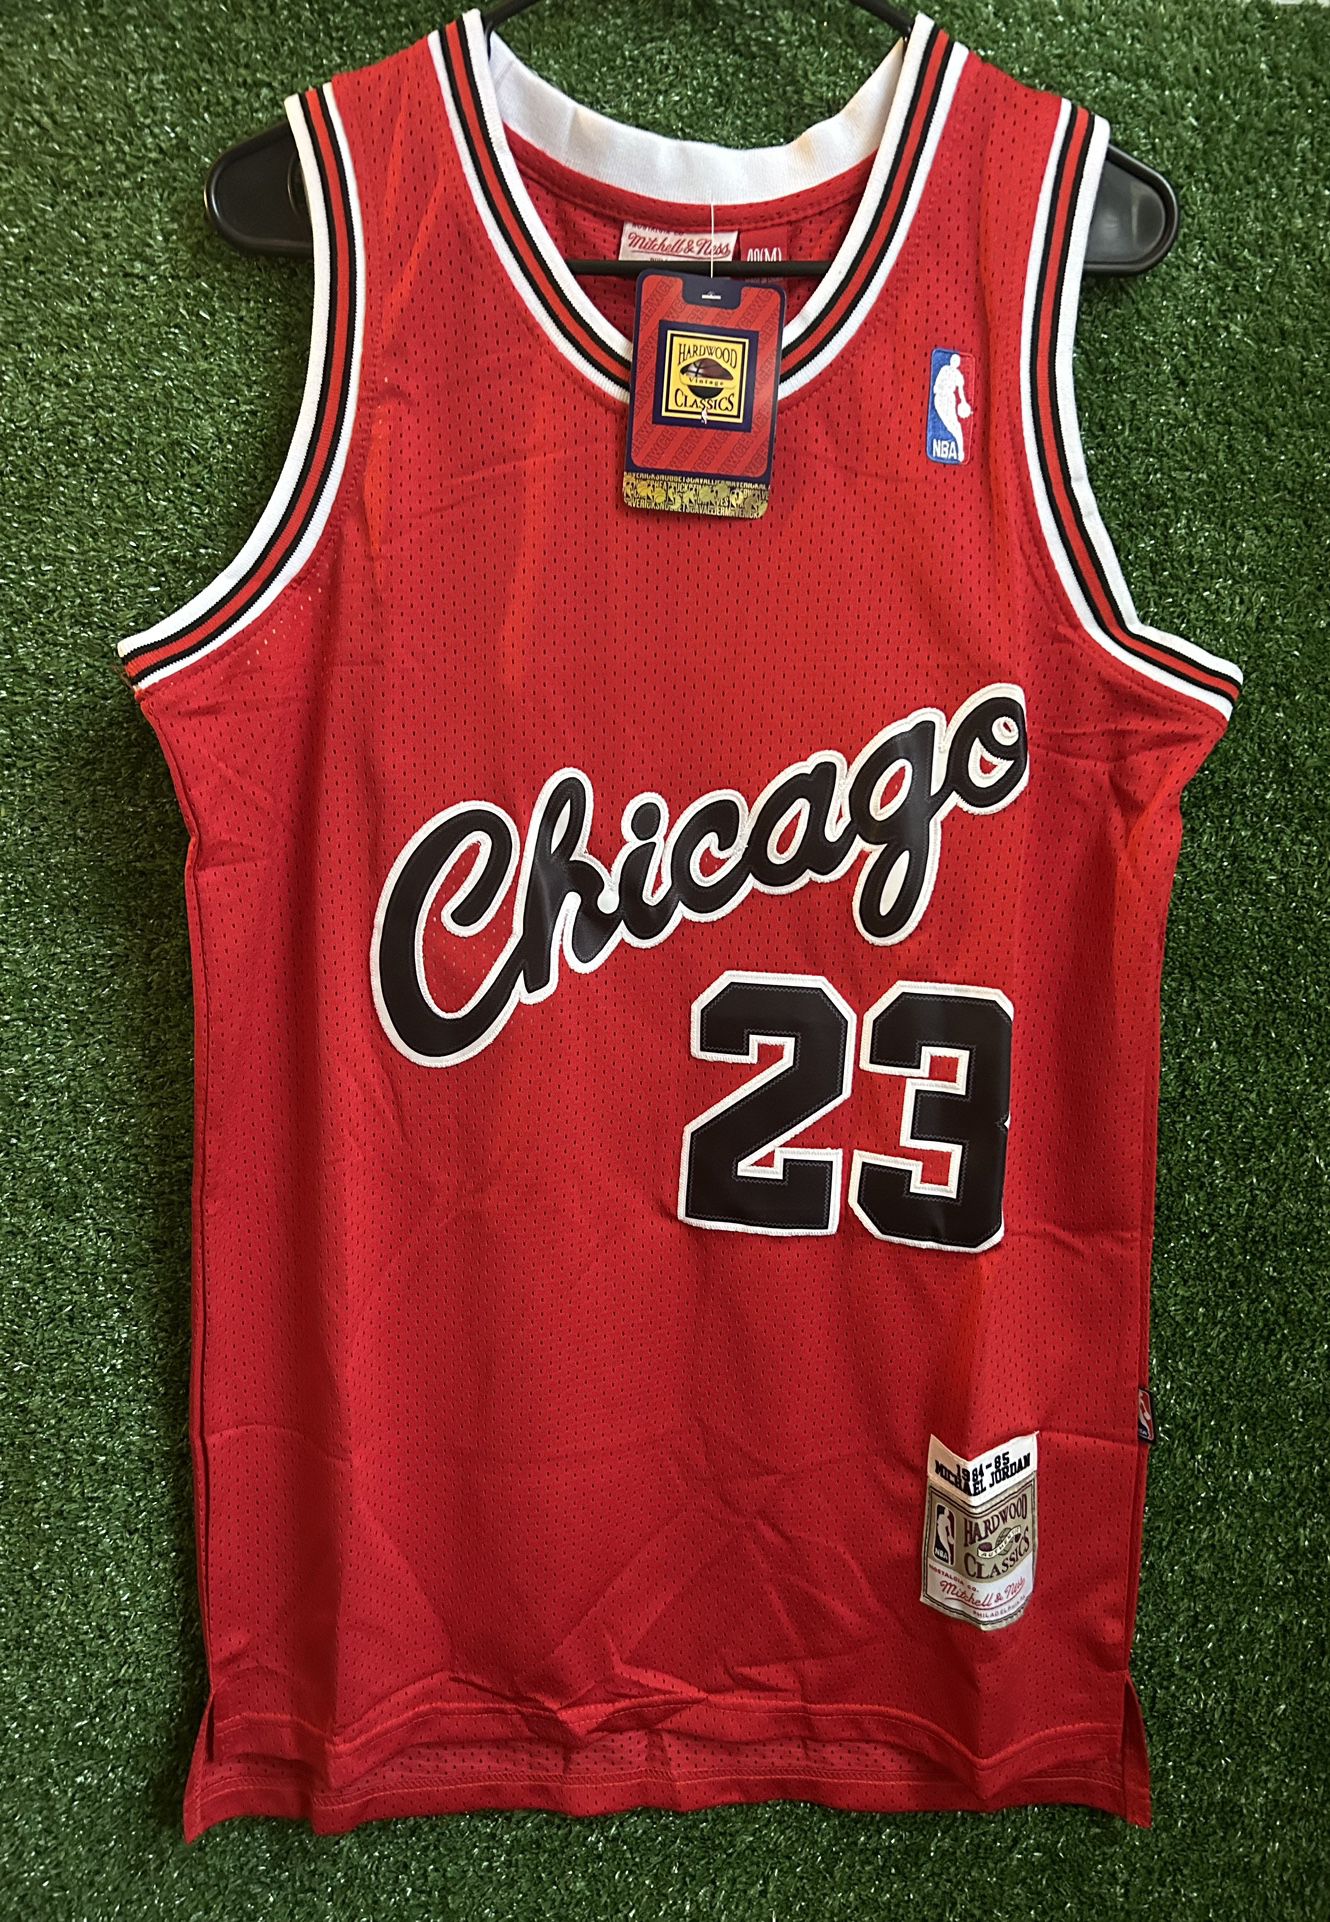 MICHAEL JORDAN CHICAGO BULLS MITCHELL & NESS JERSEY BRAND NEW WITH TAGS SIZES MEDIUM, LARGE AND XL AVAILABLE